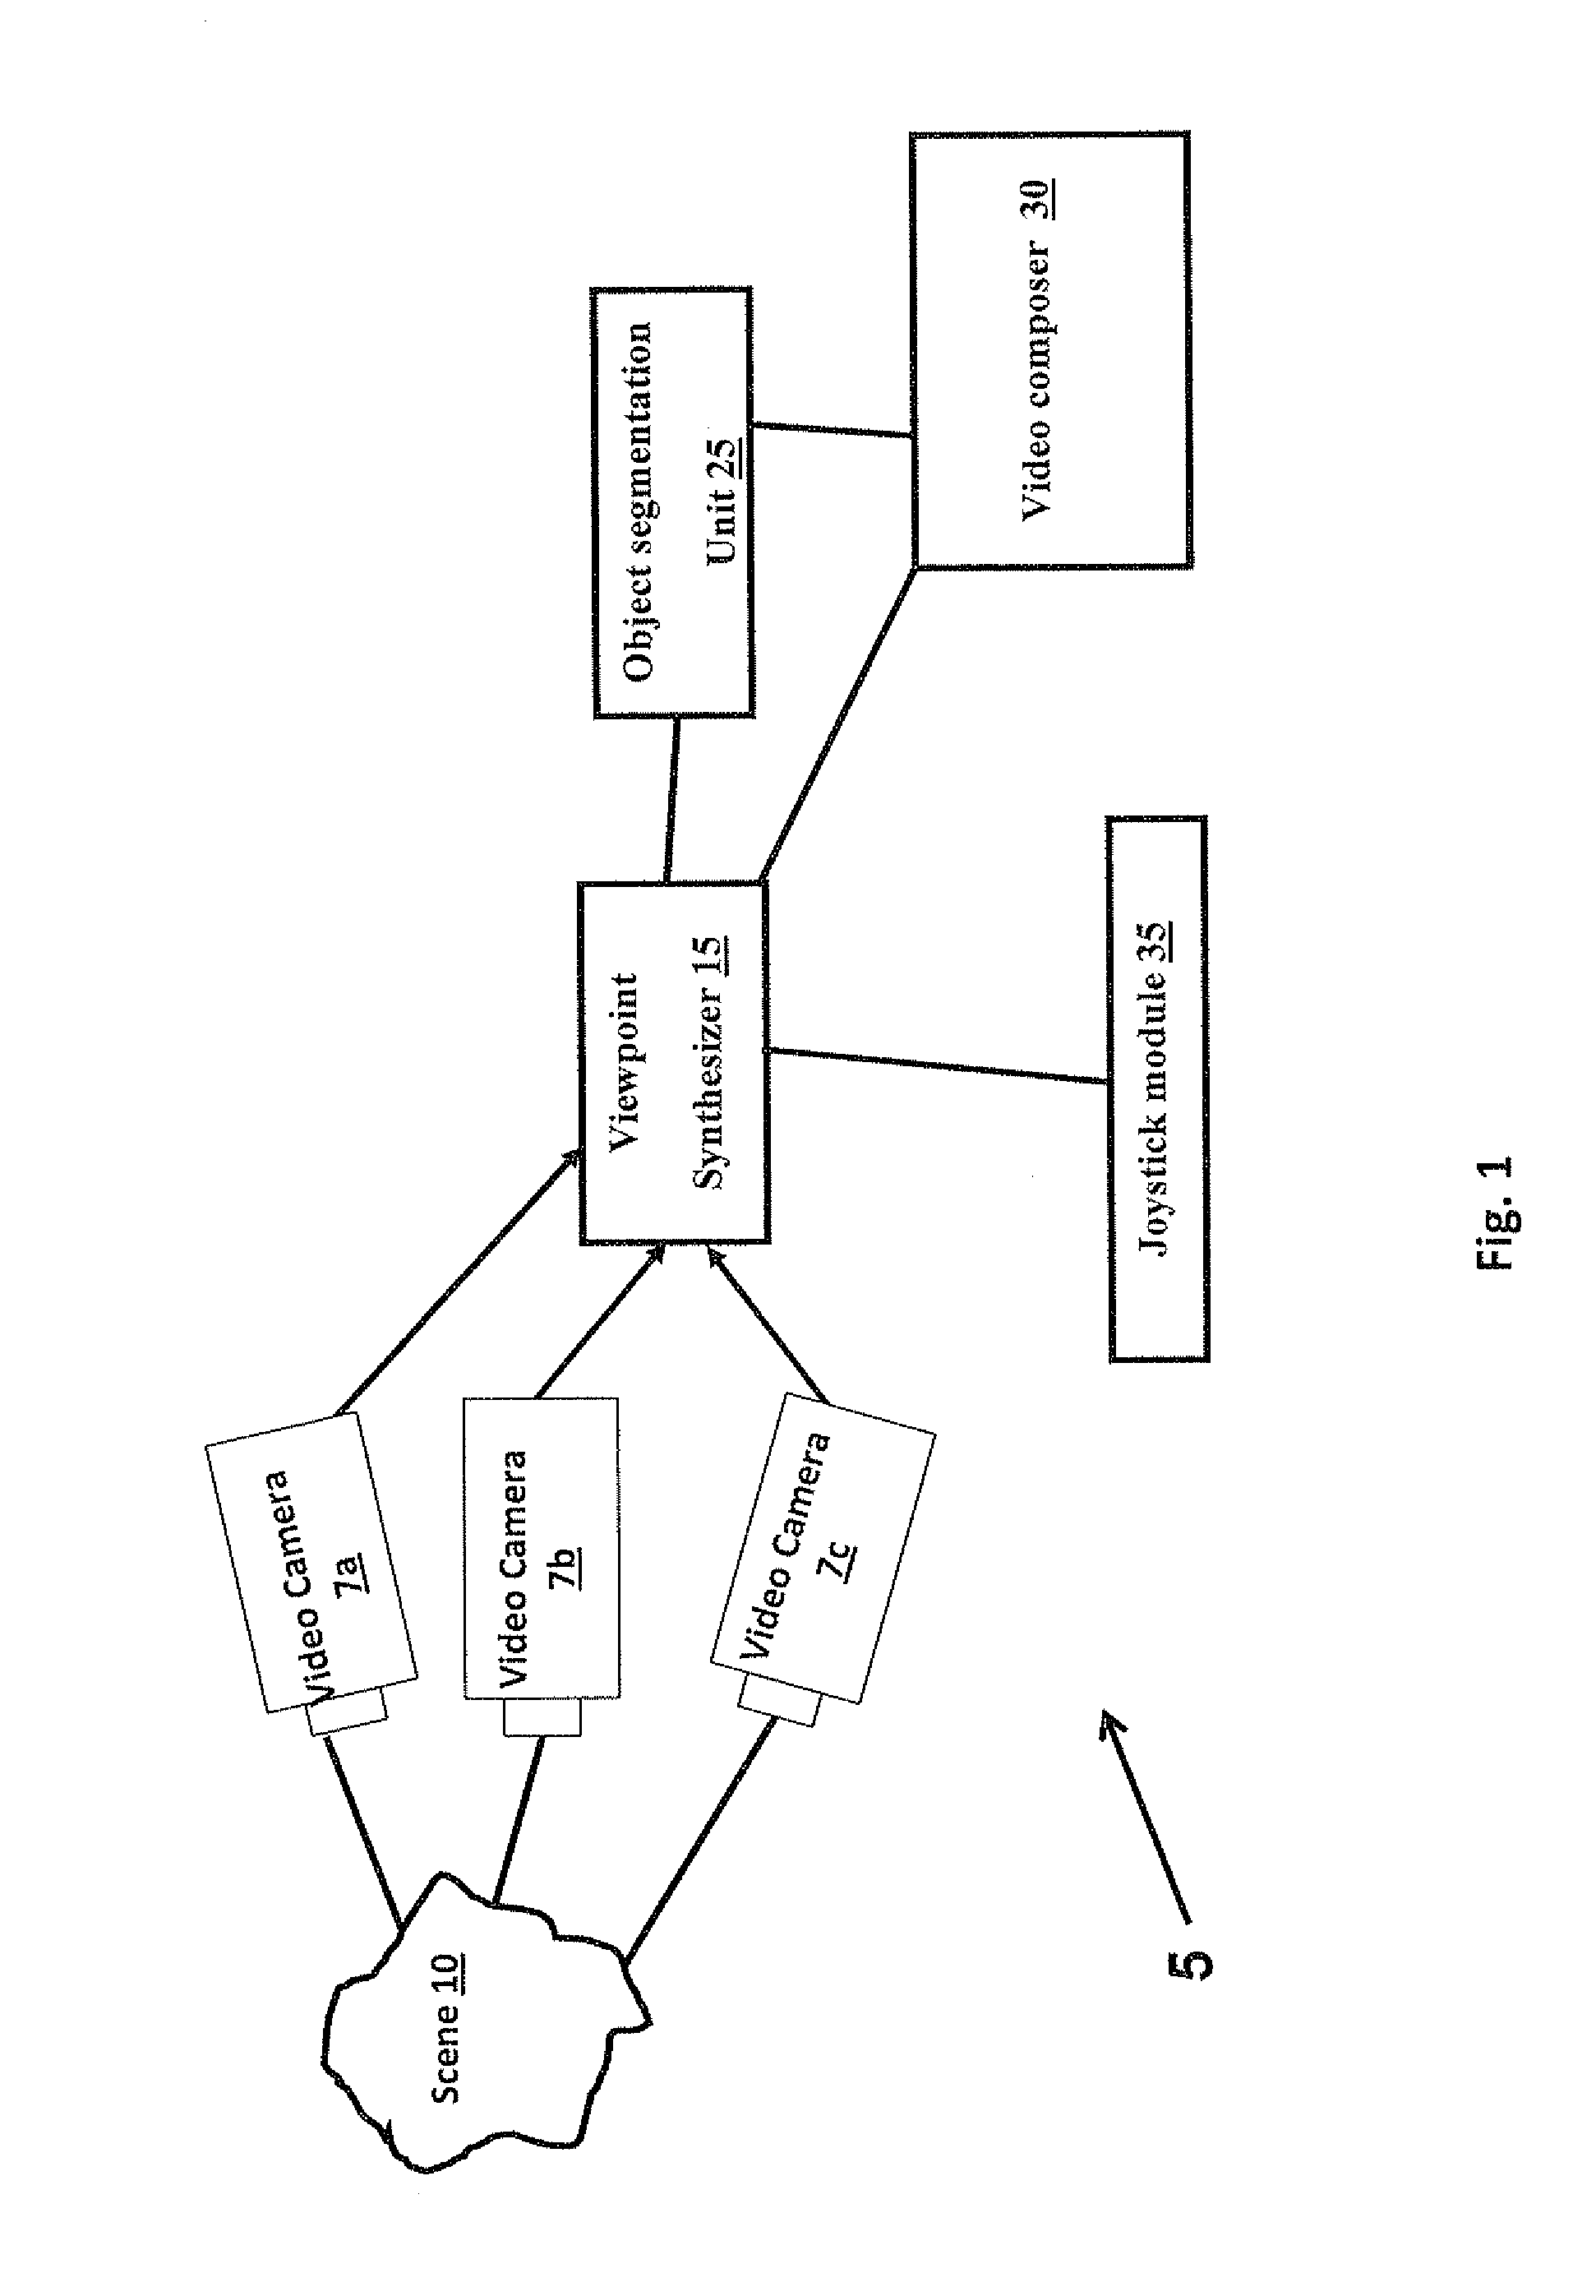 Method and system for fusing video streams